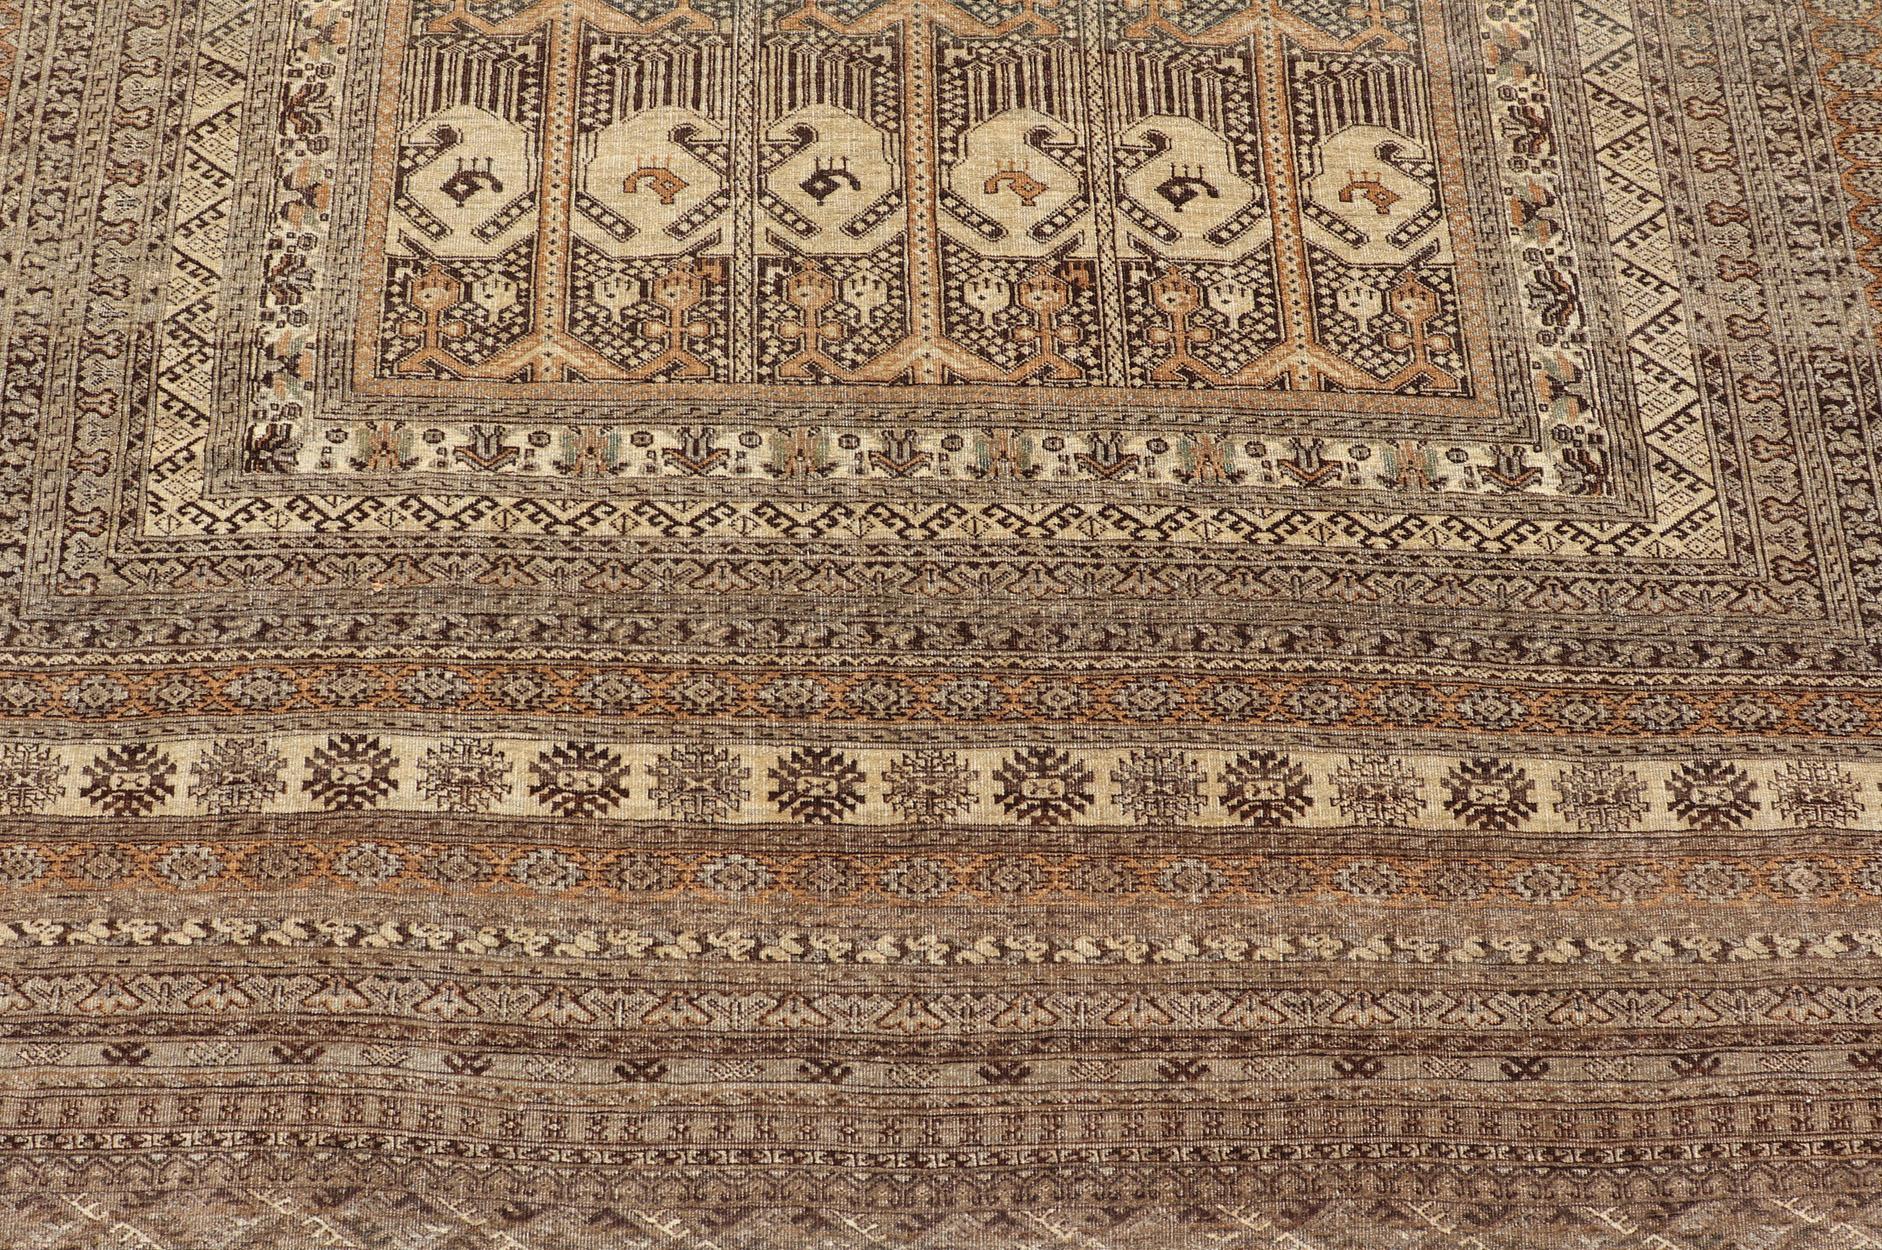 Hand-Knotted Turkomen Ersari Rug in Wool with All-Over Tribal Beluch Design In Good Condition For Sale In Atlanta, GA